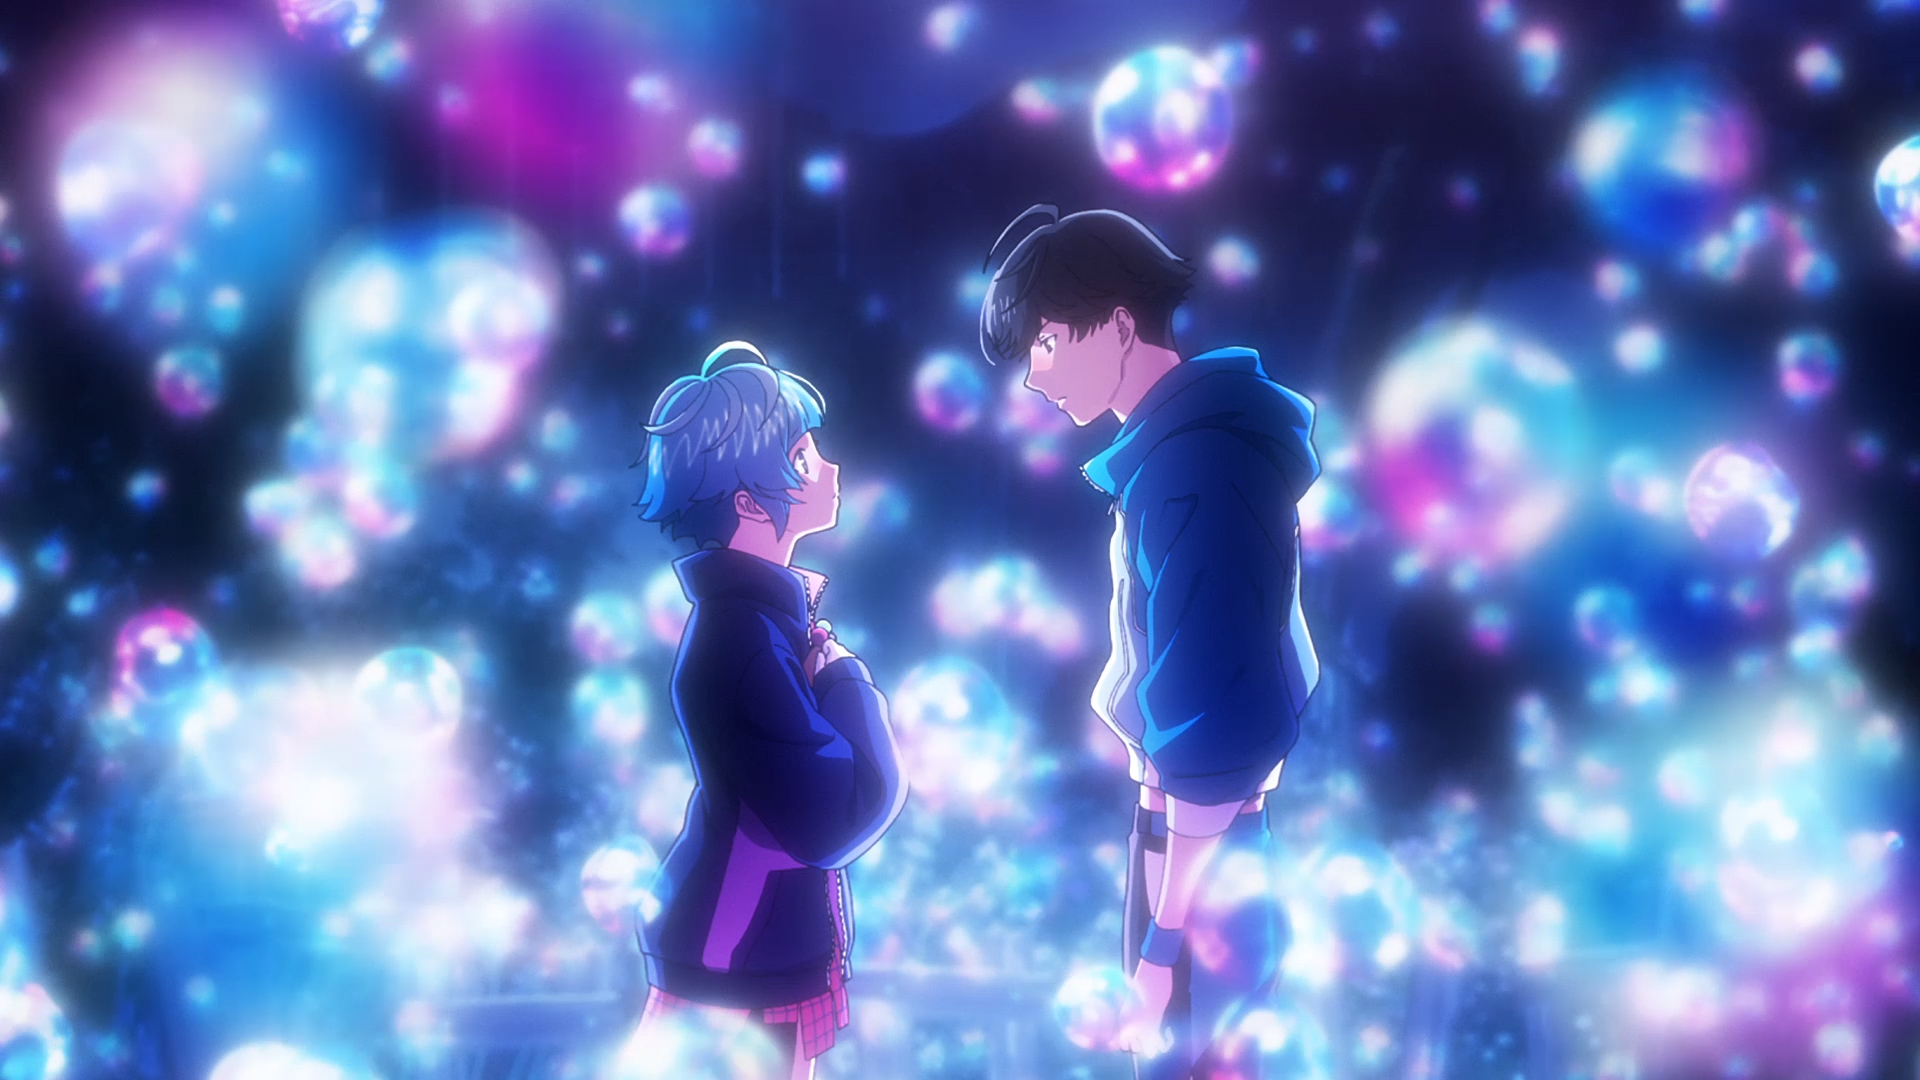 Hibiki and Uta face each other in a dense field of blue and purple bubbles in the anime movie Bubble